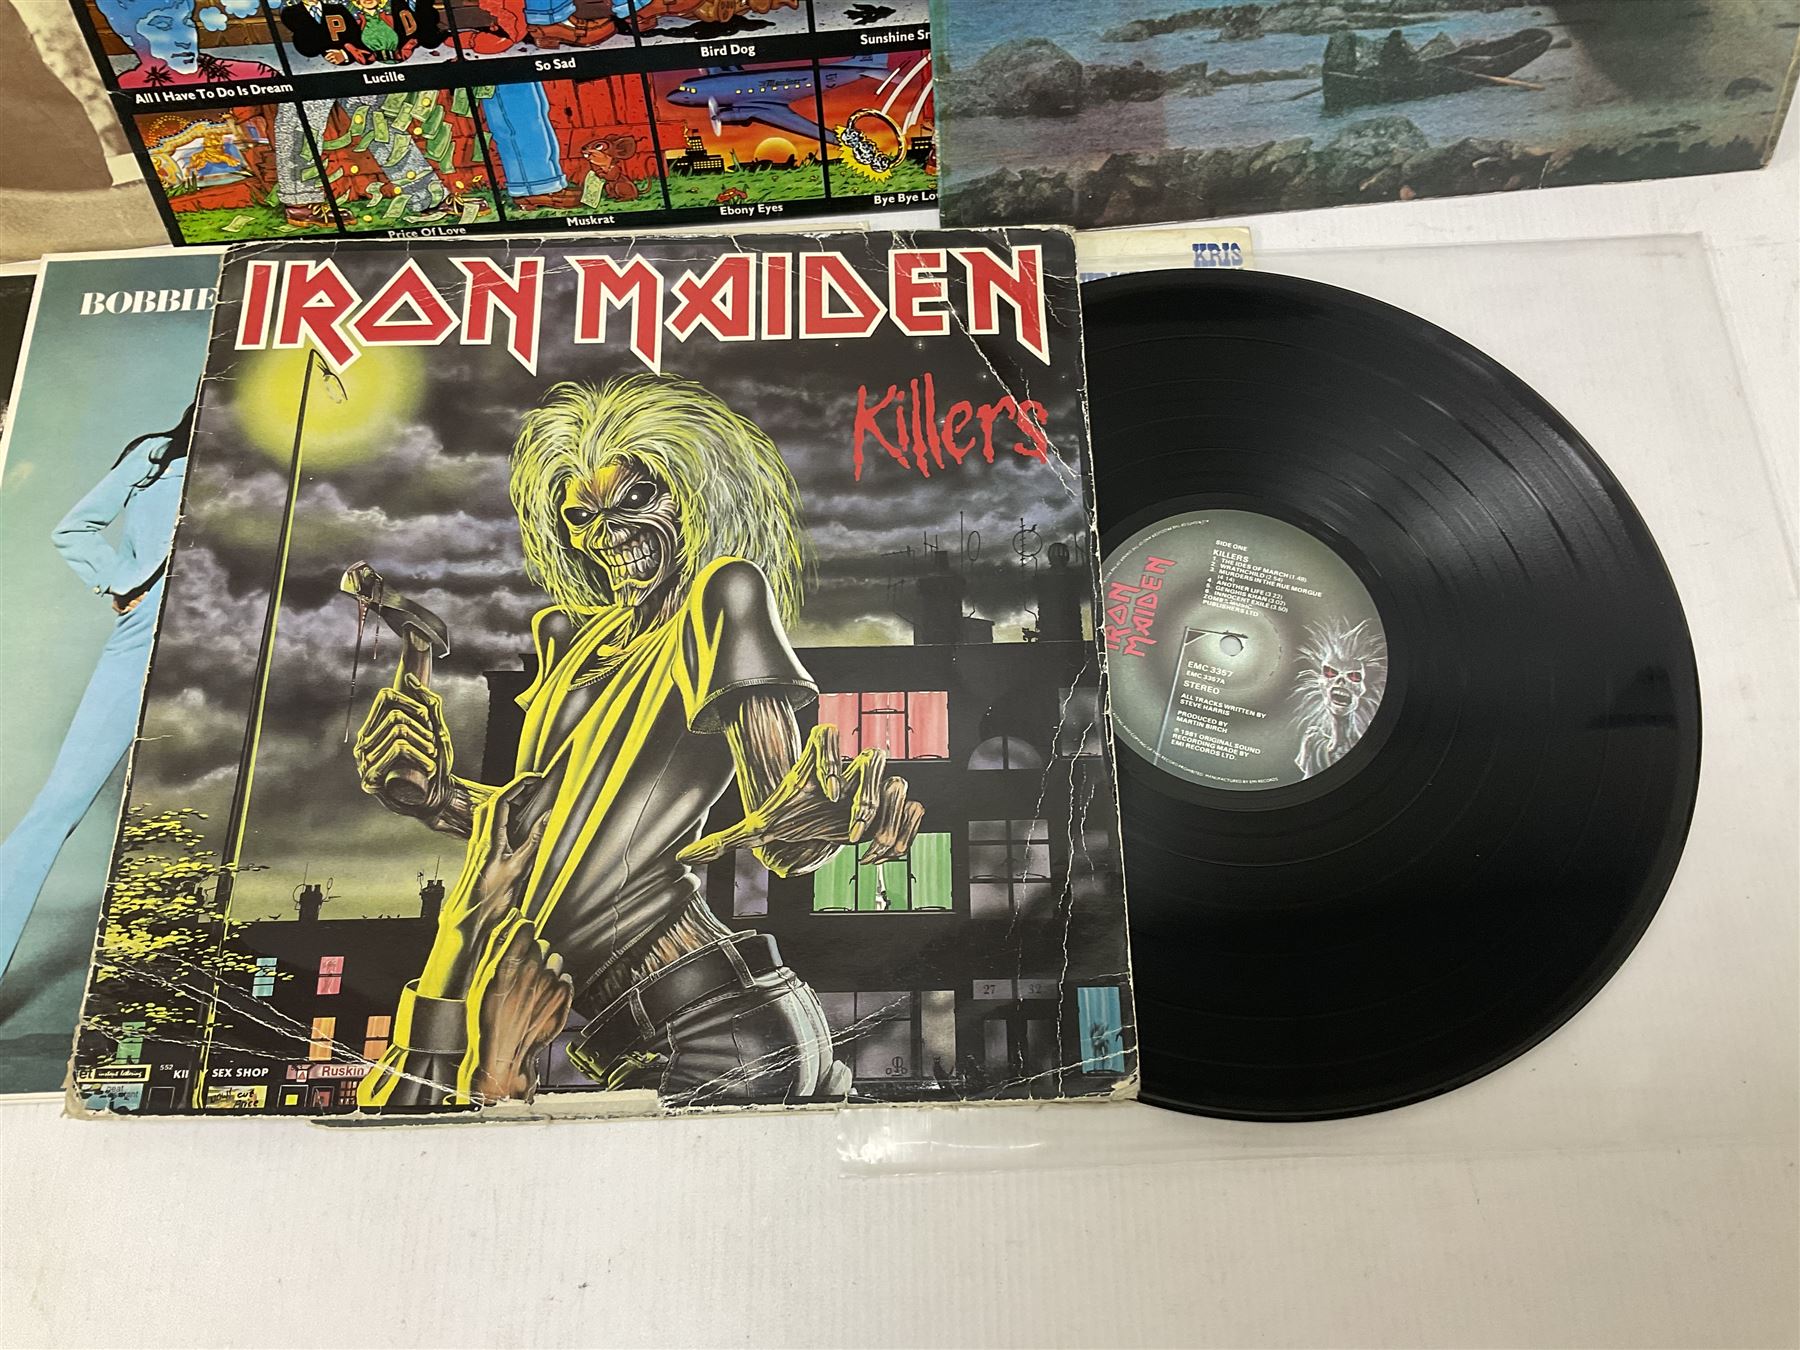 Vinyl LP records including Iron Maiden Killers - Image 6 of 11